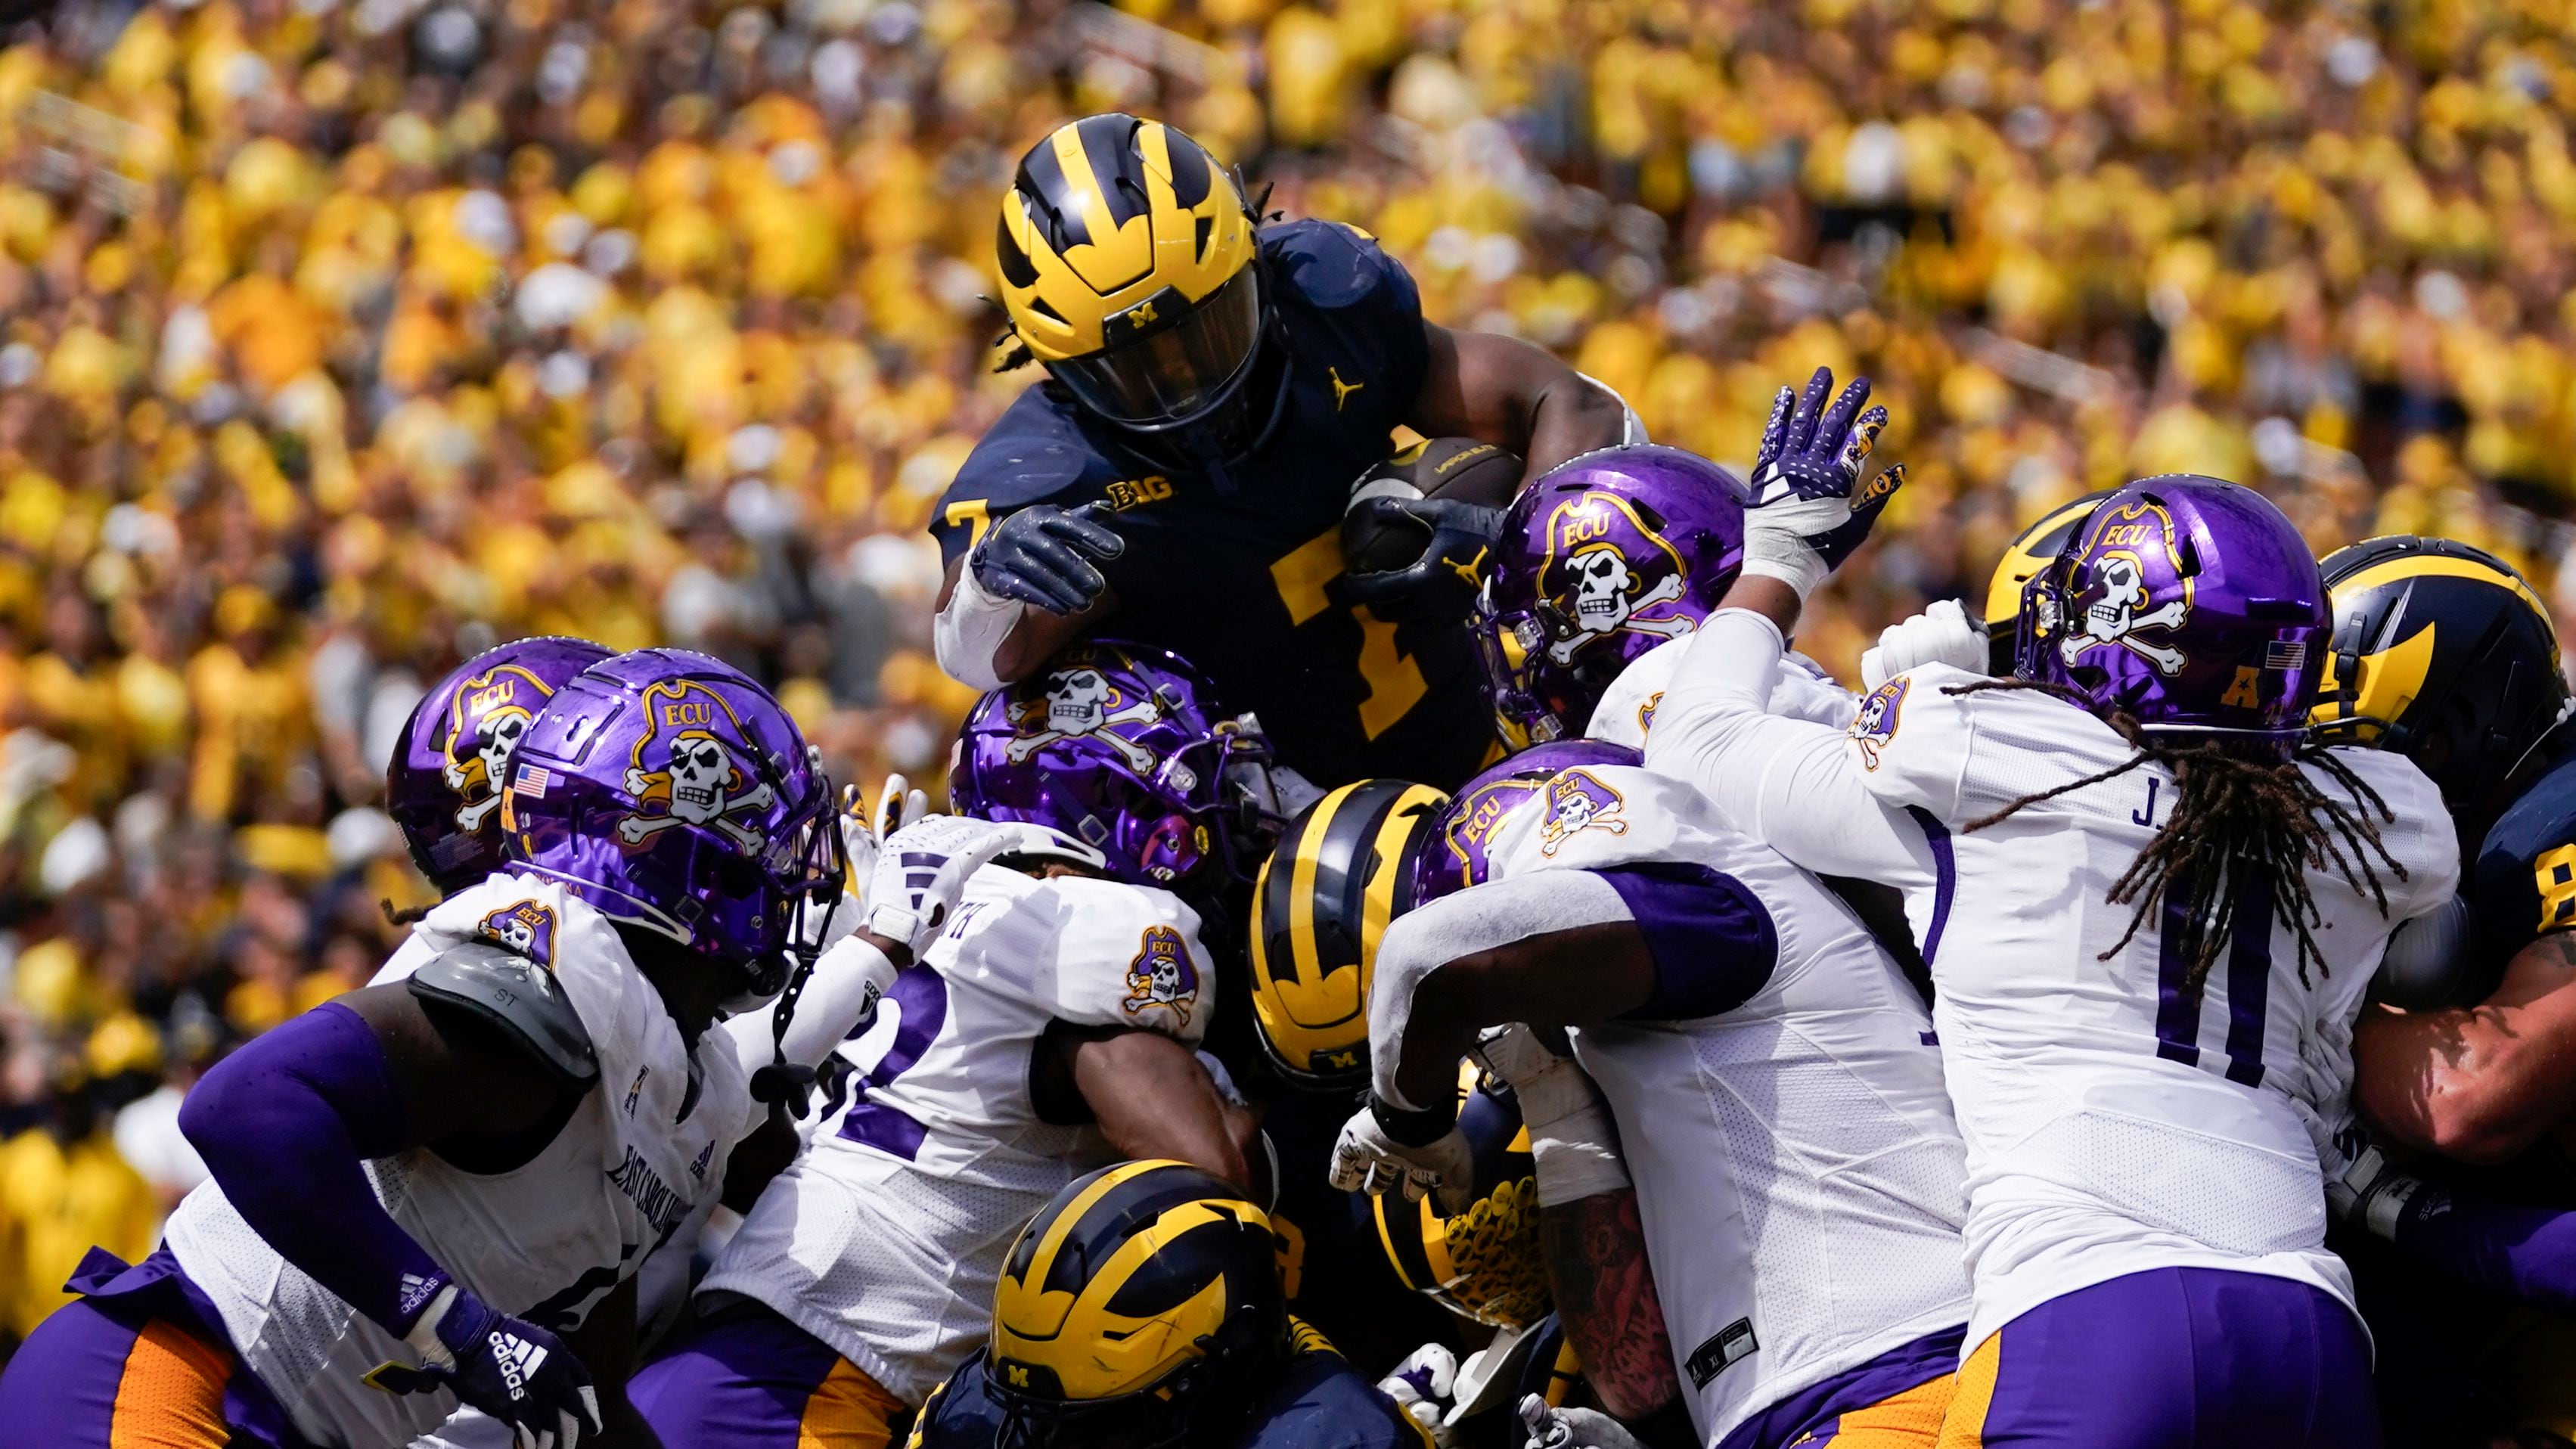 J.J. McCarthy leads No. 2 Michigan over East Carolina 30-3 without Jim  Harbaugh on the sideline